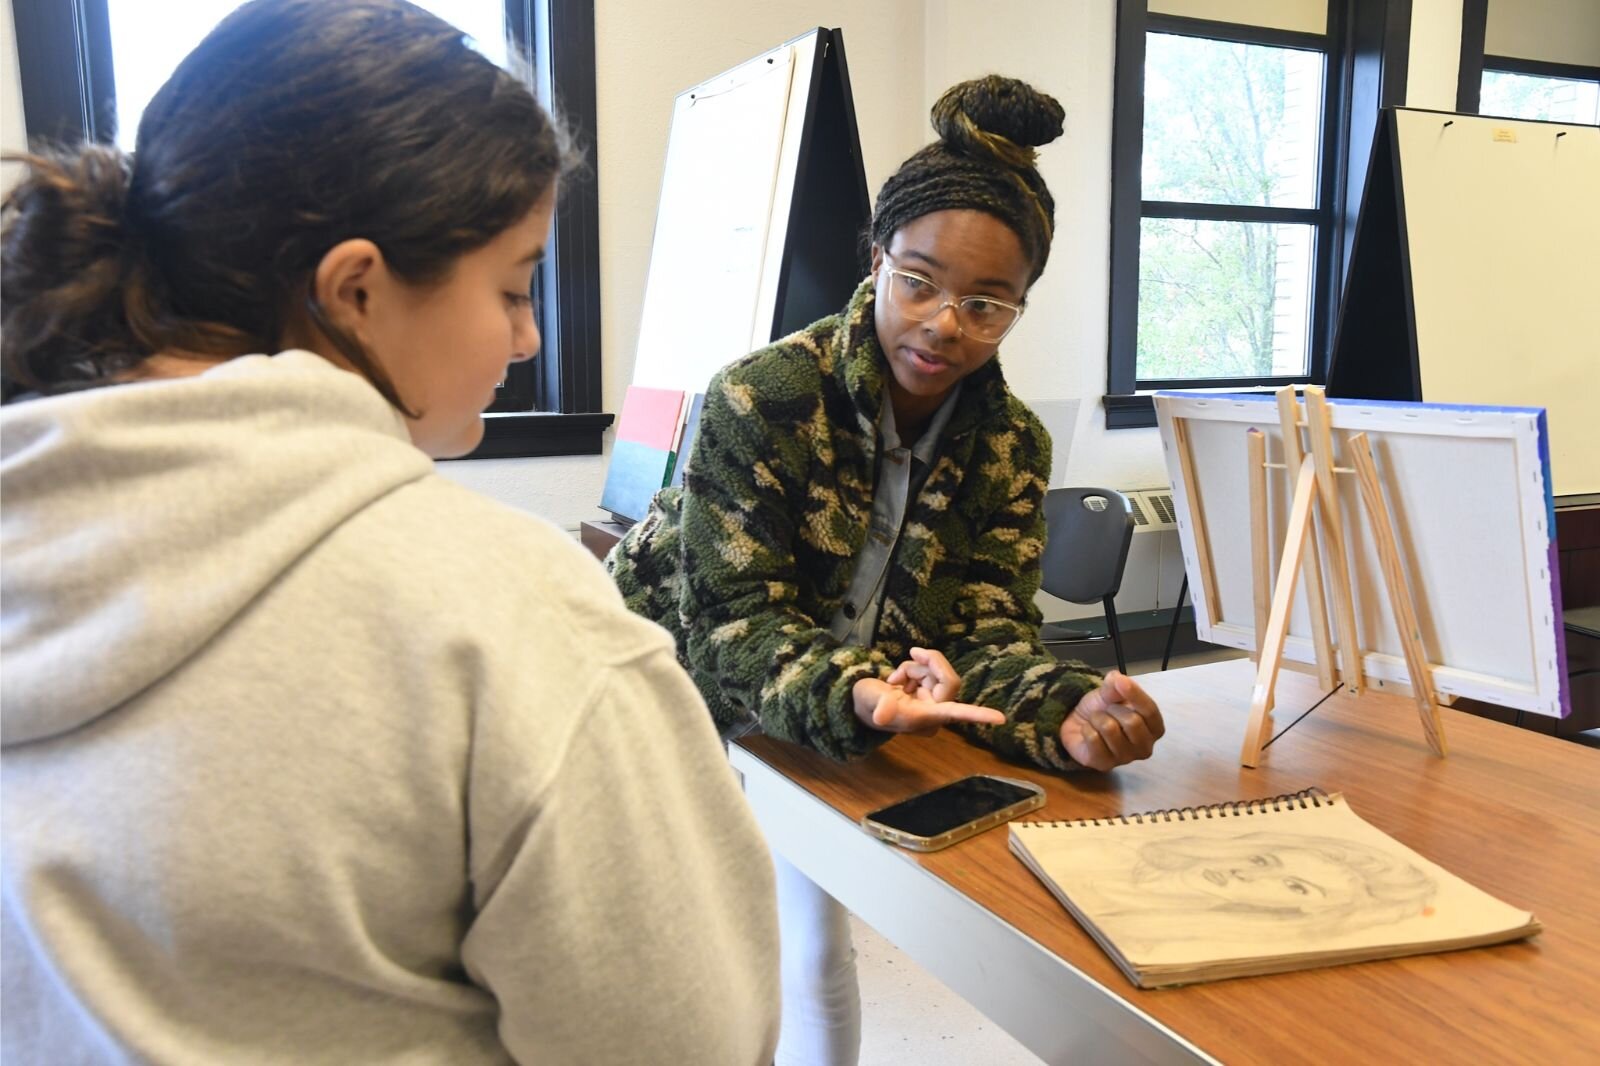 Jamari Taylor, right, provides feedback to one of her students, Willow Schantz.